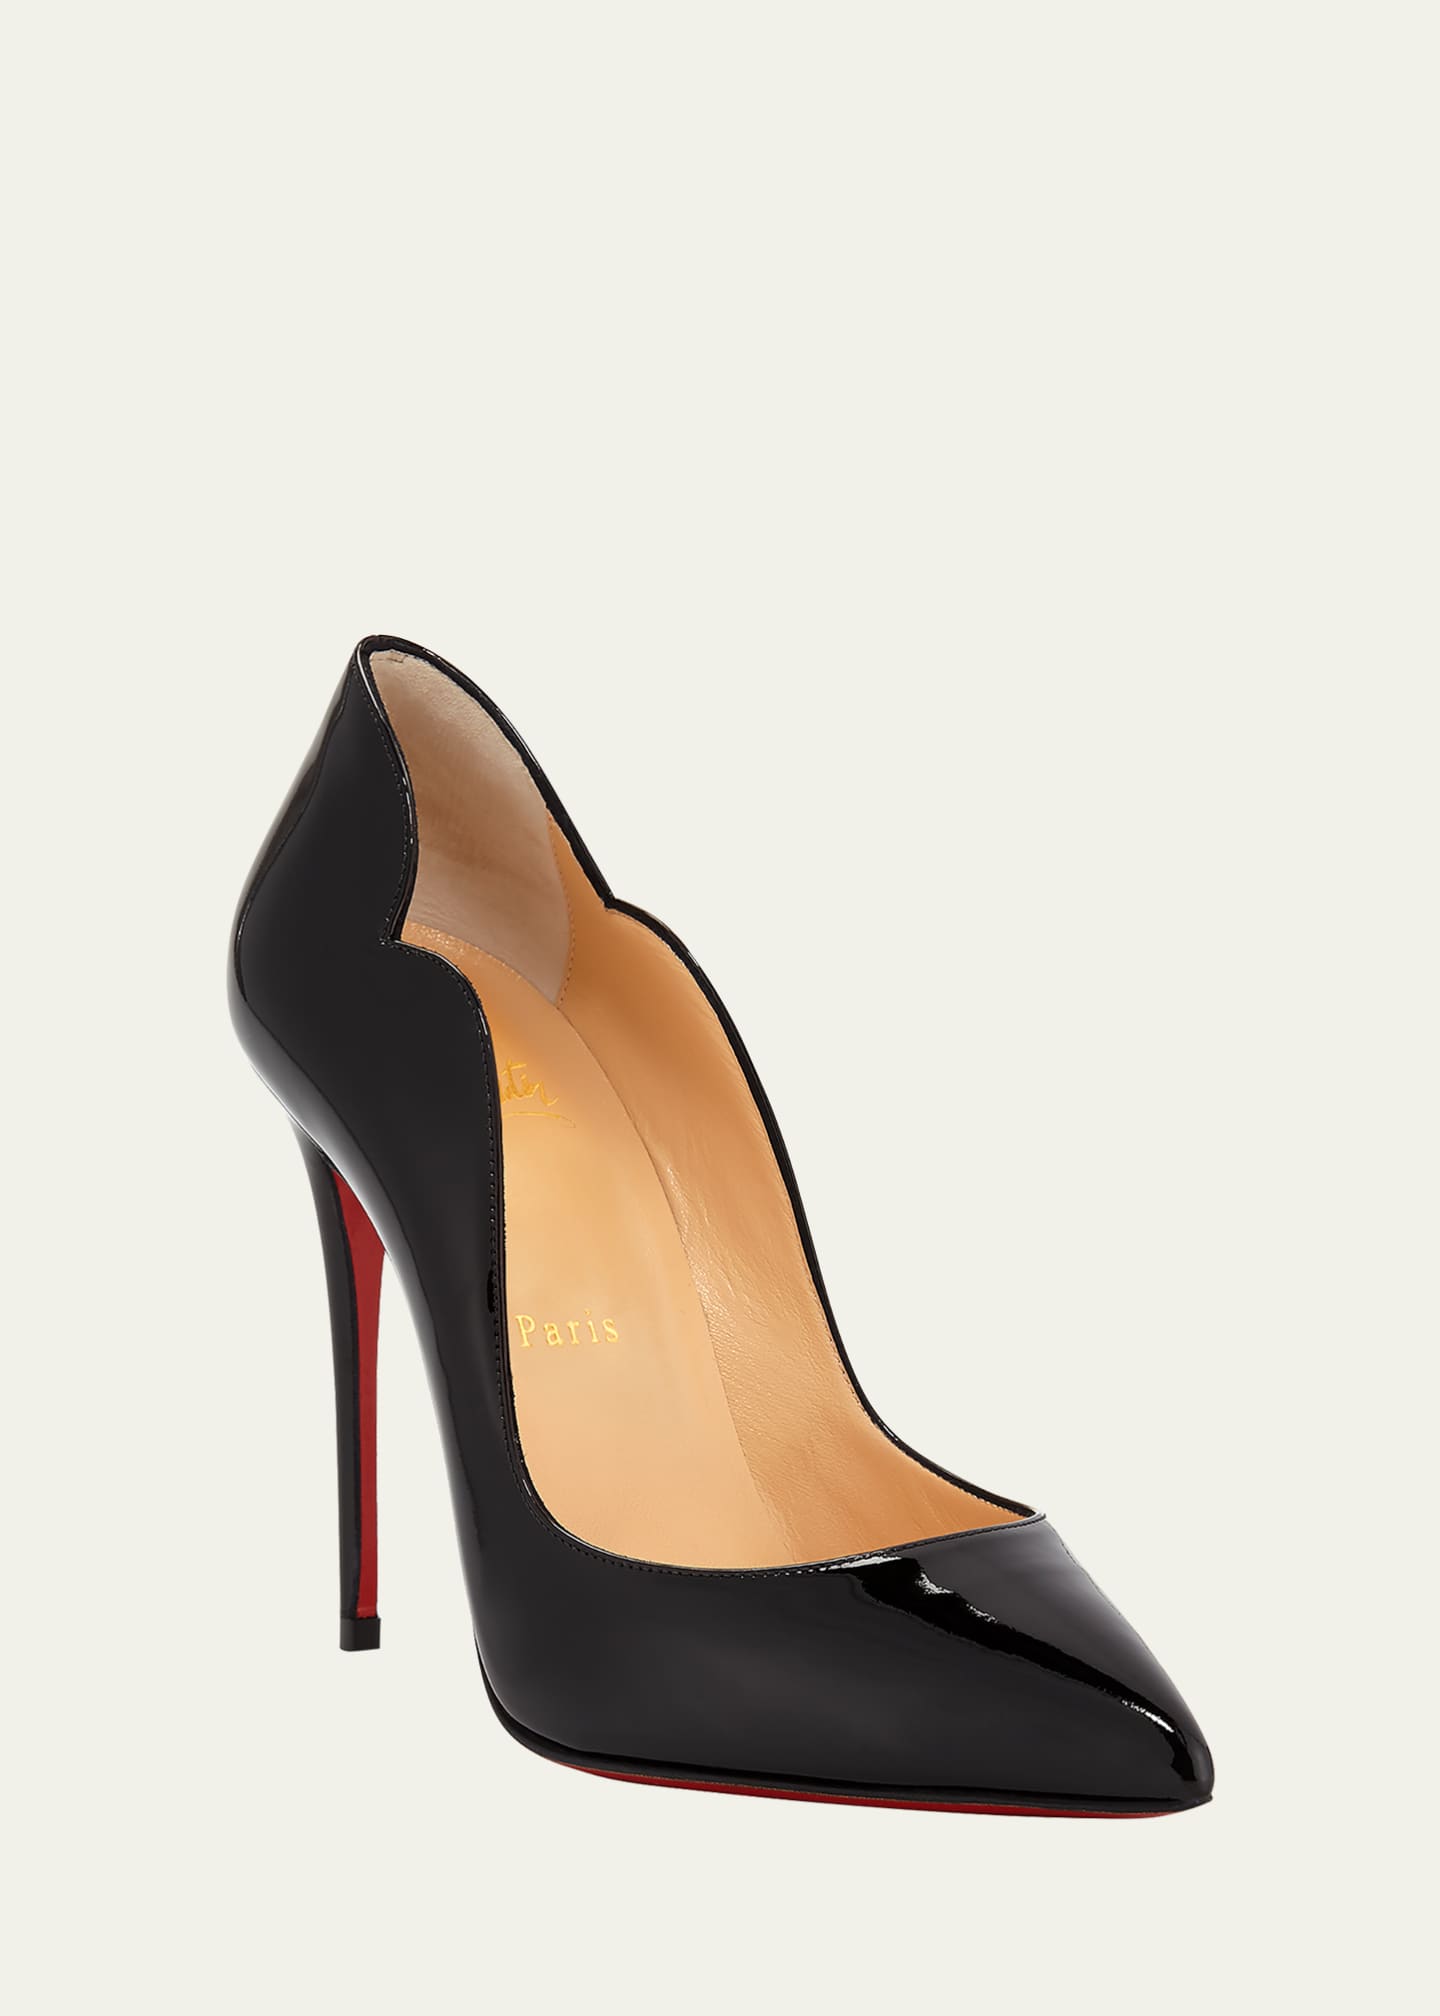 Christian Louboutin on X: Give in to the the Hot Chick pump's